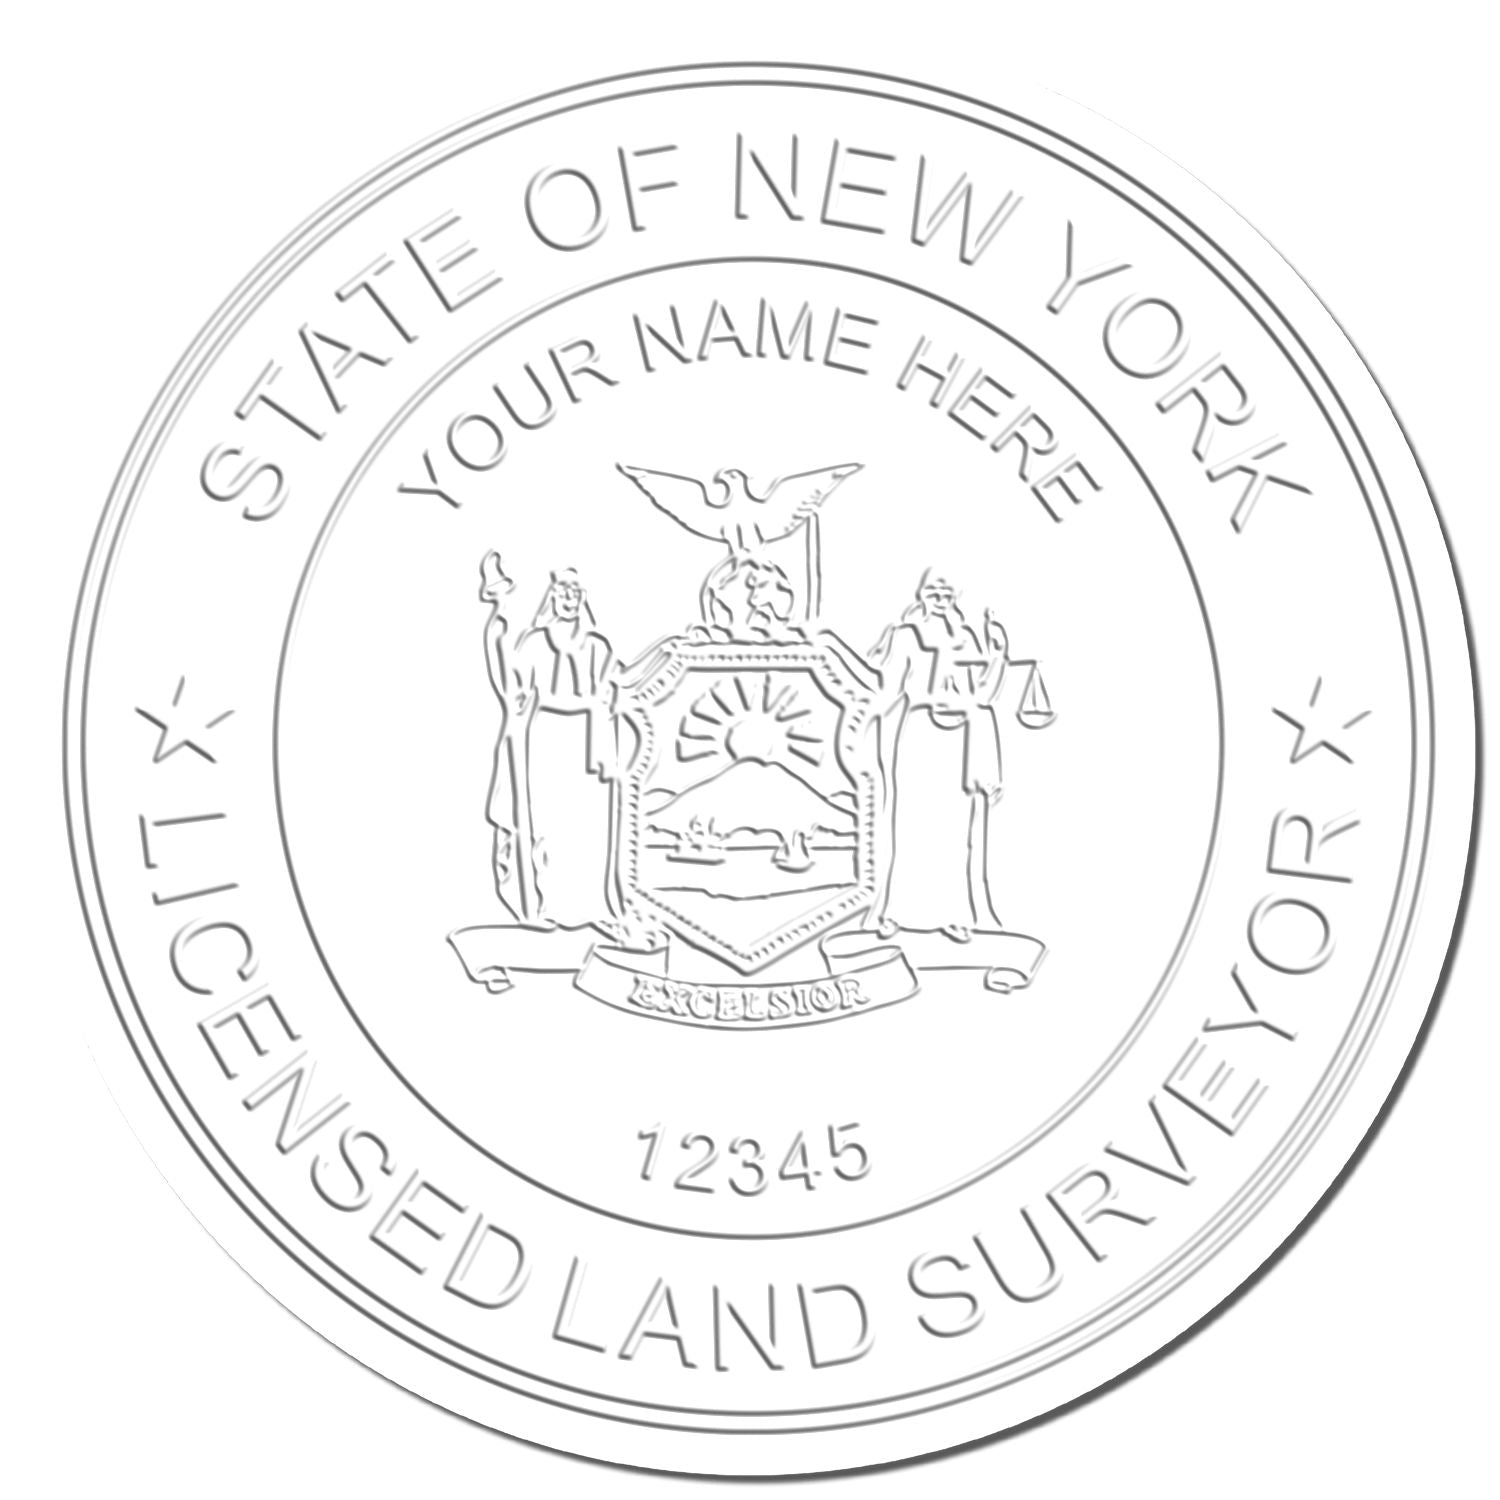 This paper is stamped with a sample imprint of the Hybrid New York Land Surveyor Seal, signifying its quality and reliability.